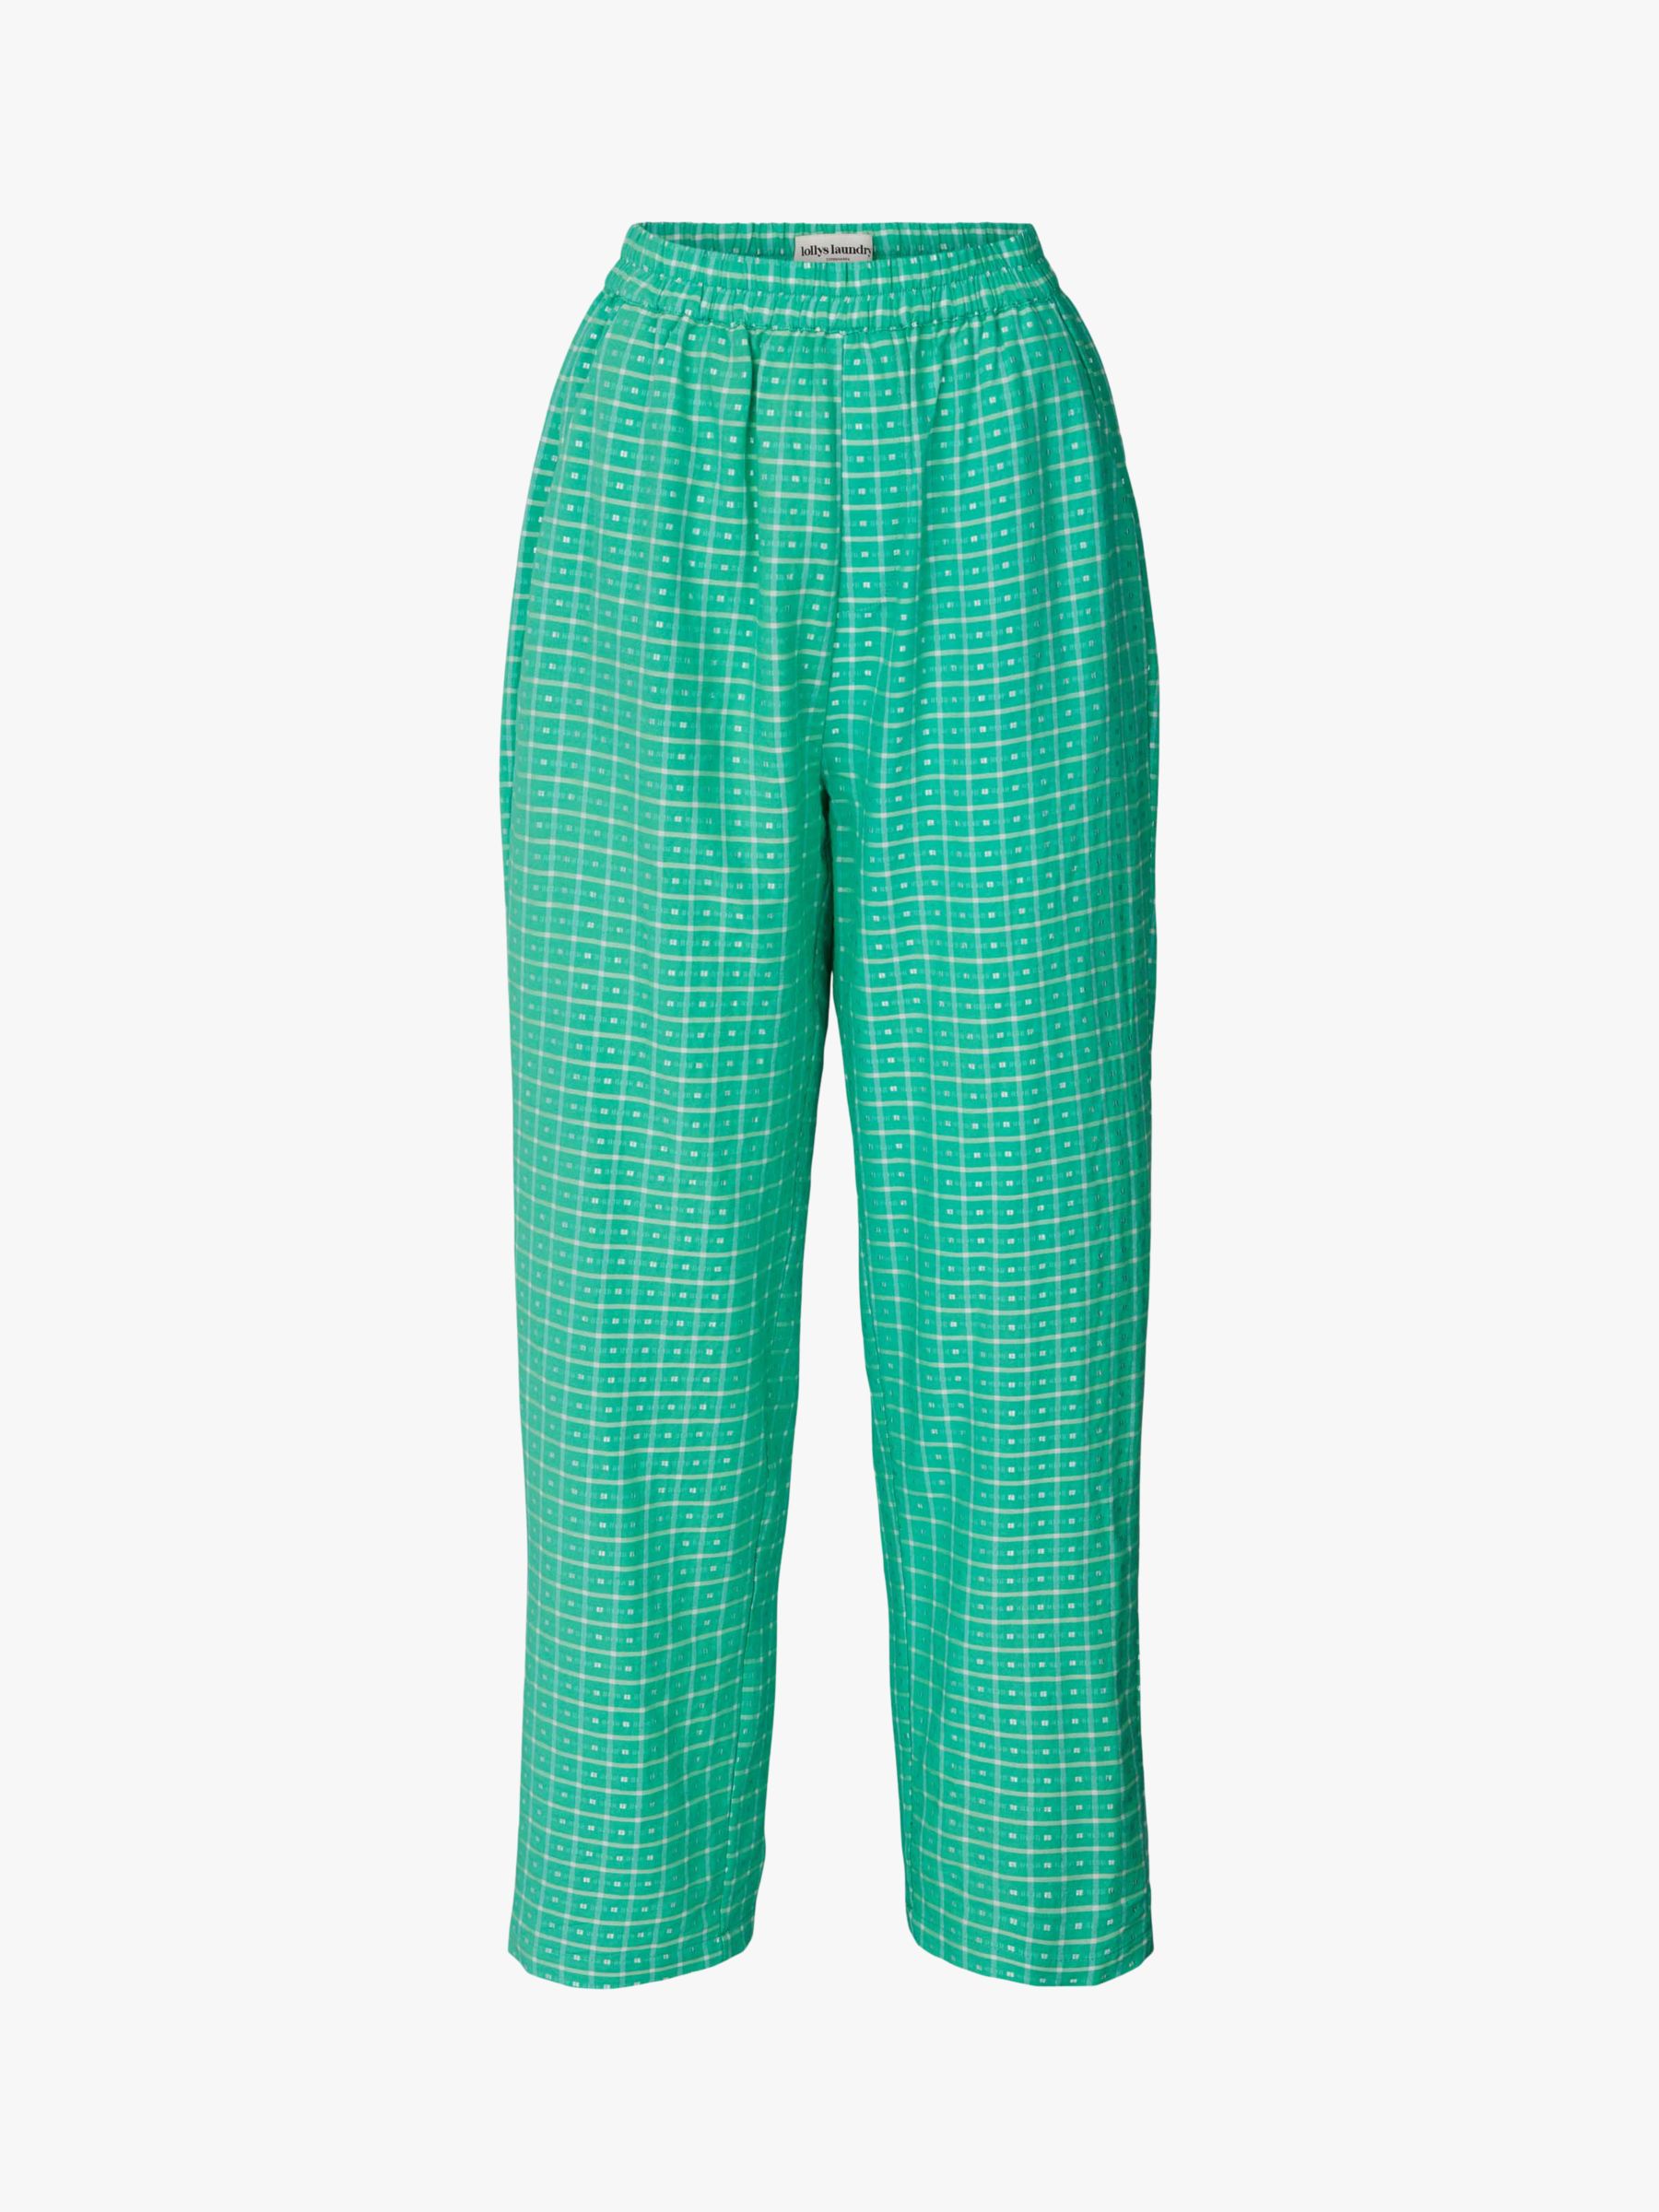 Lollys Laundry Bill Check Print Trousers, Green at John Lewis & Partners